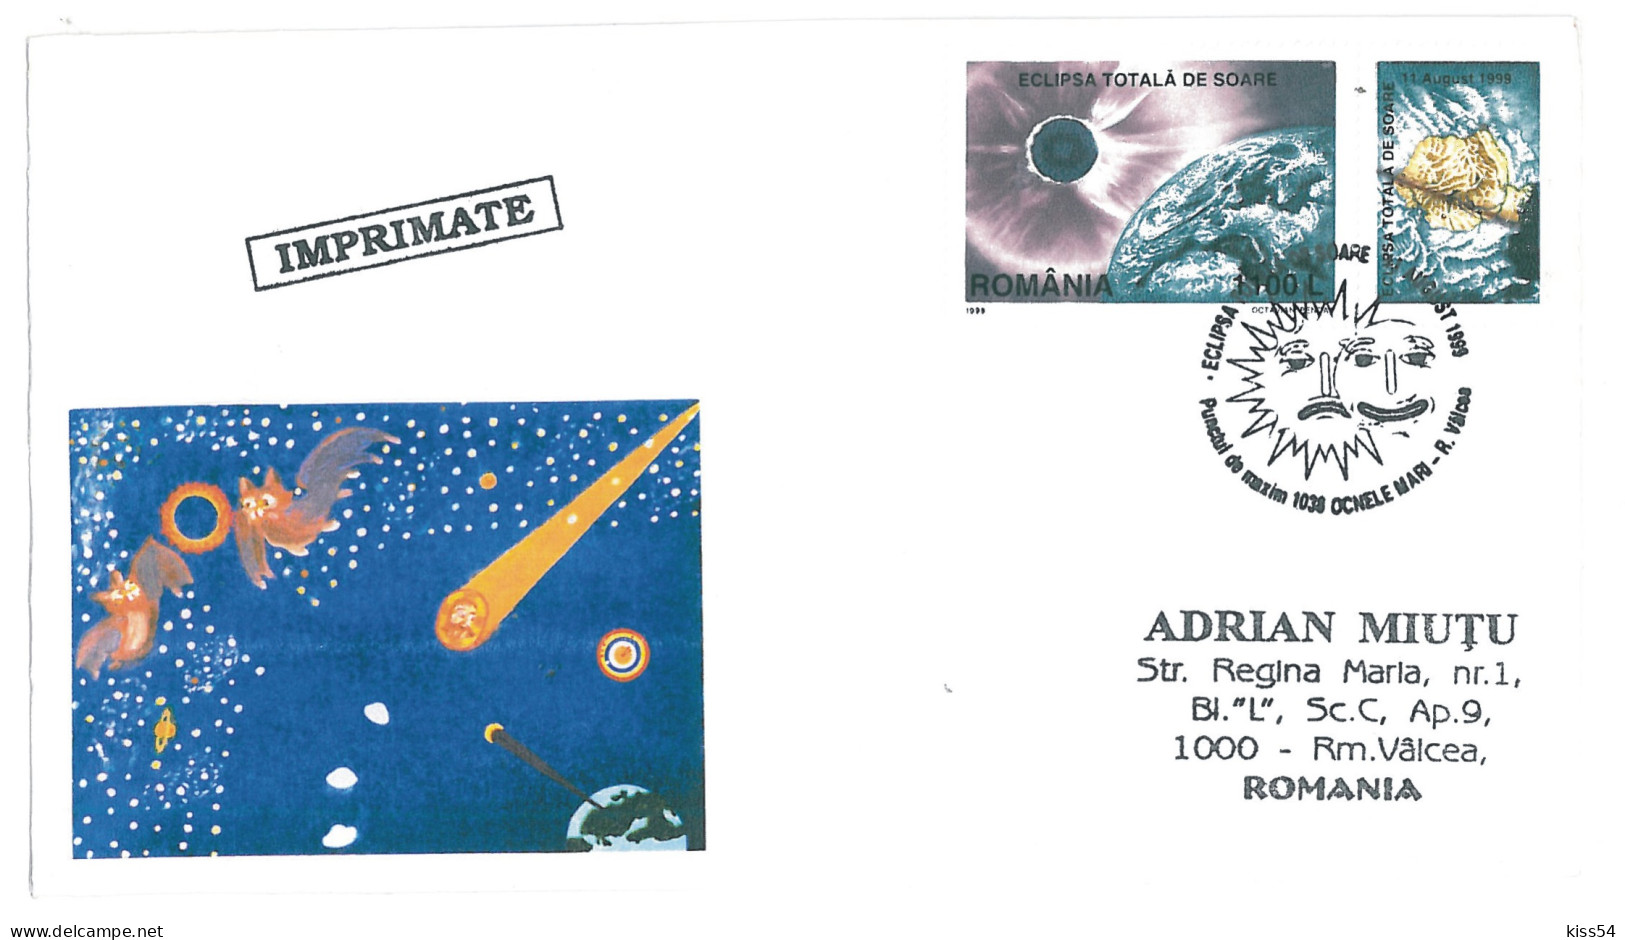 COV 87 - 1513 ASTRONOMY, Total Solar Eclipse, Romania, Stamp With Vignette - Cover - Used - 1999 - Tarjetas – Máximo